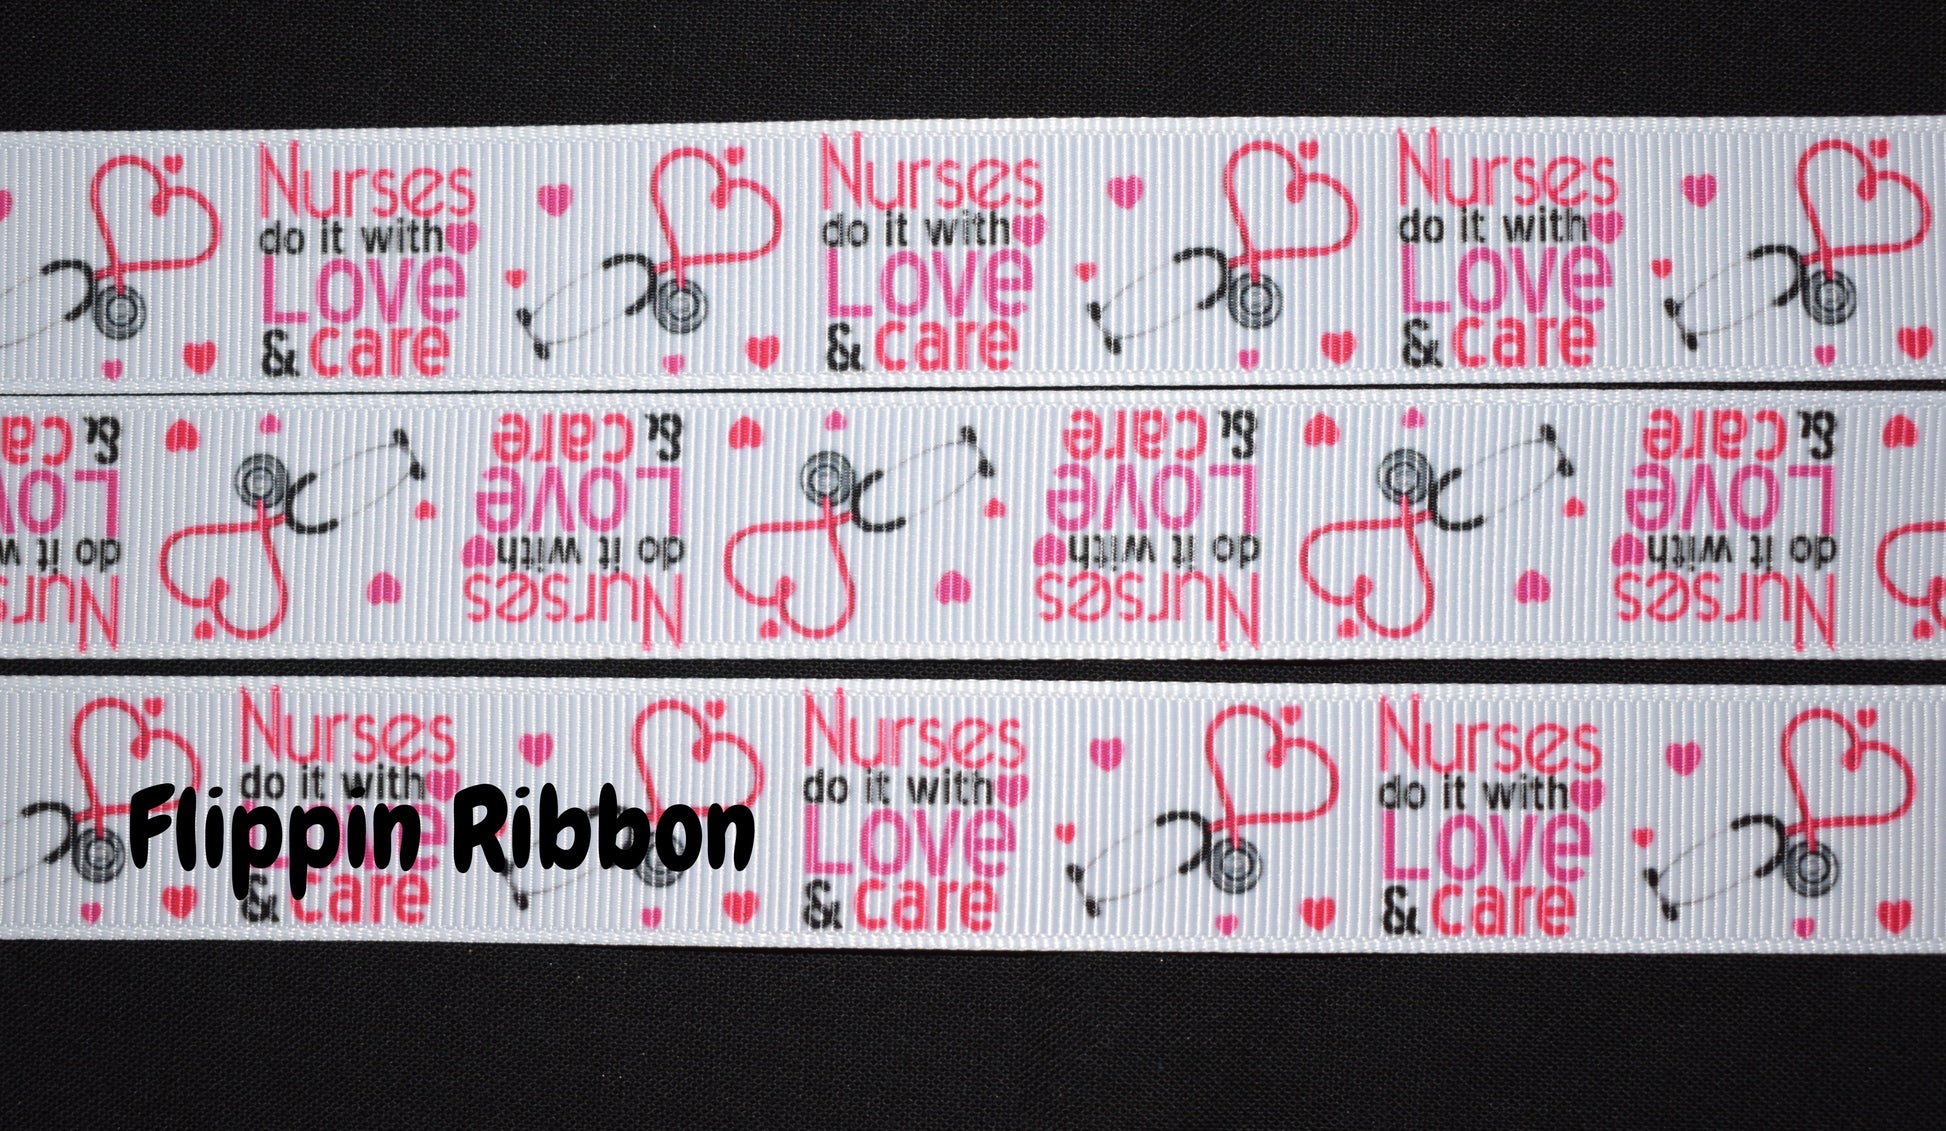 Nurses Do it with Love and Care grosgrain ribbon - Flippin Ribbon